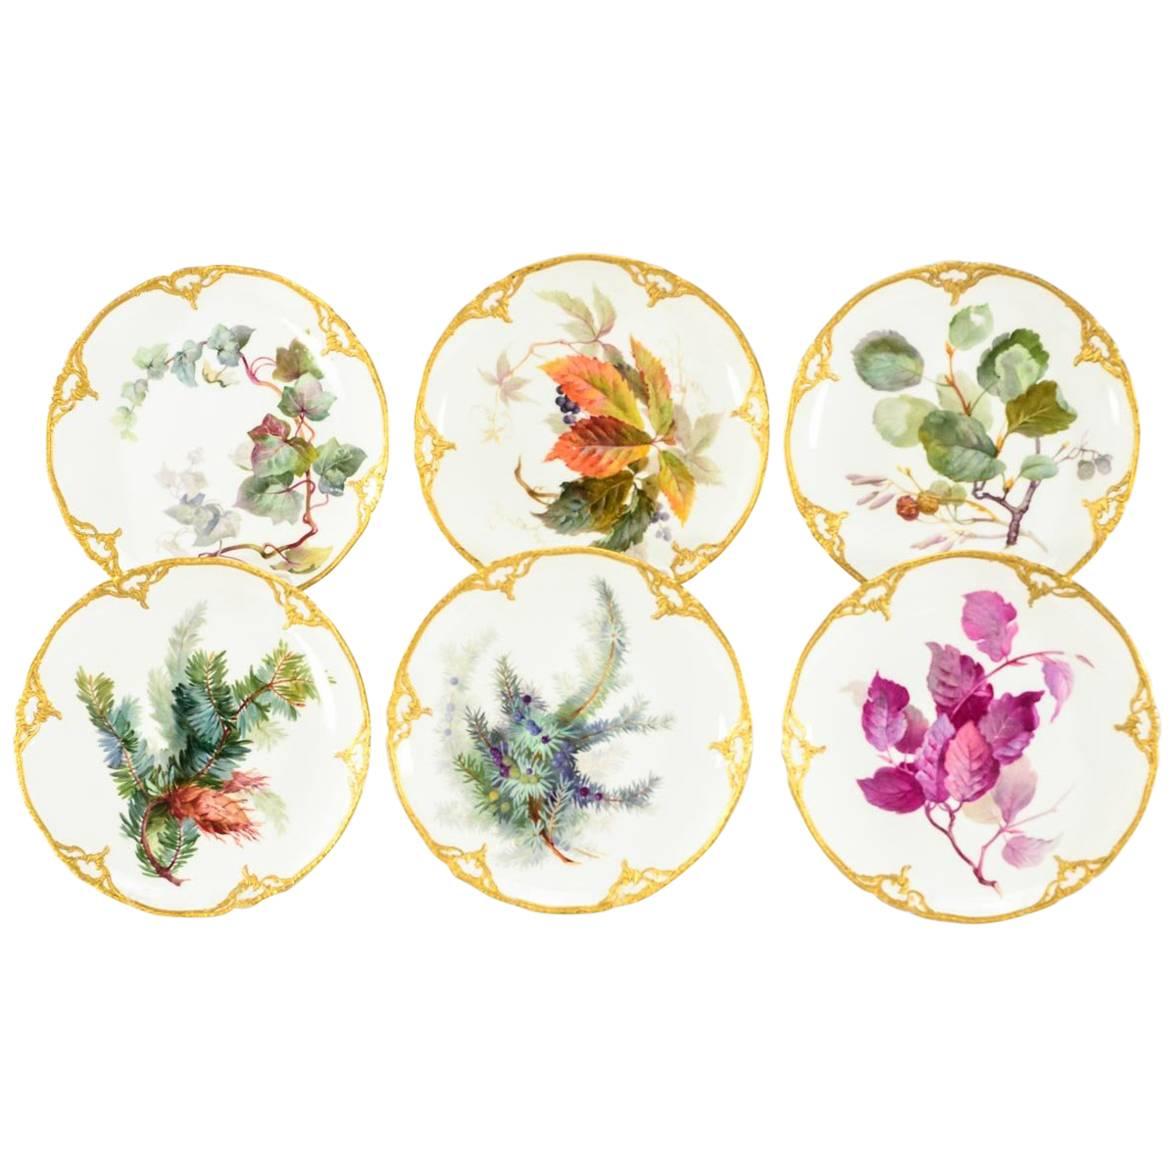 Set of Six Signed KPM Dessert Plates with Named Plant Species